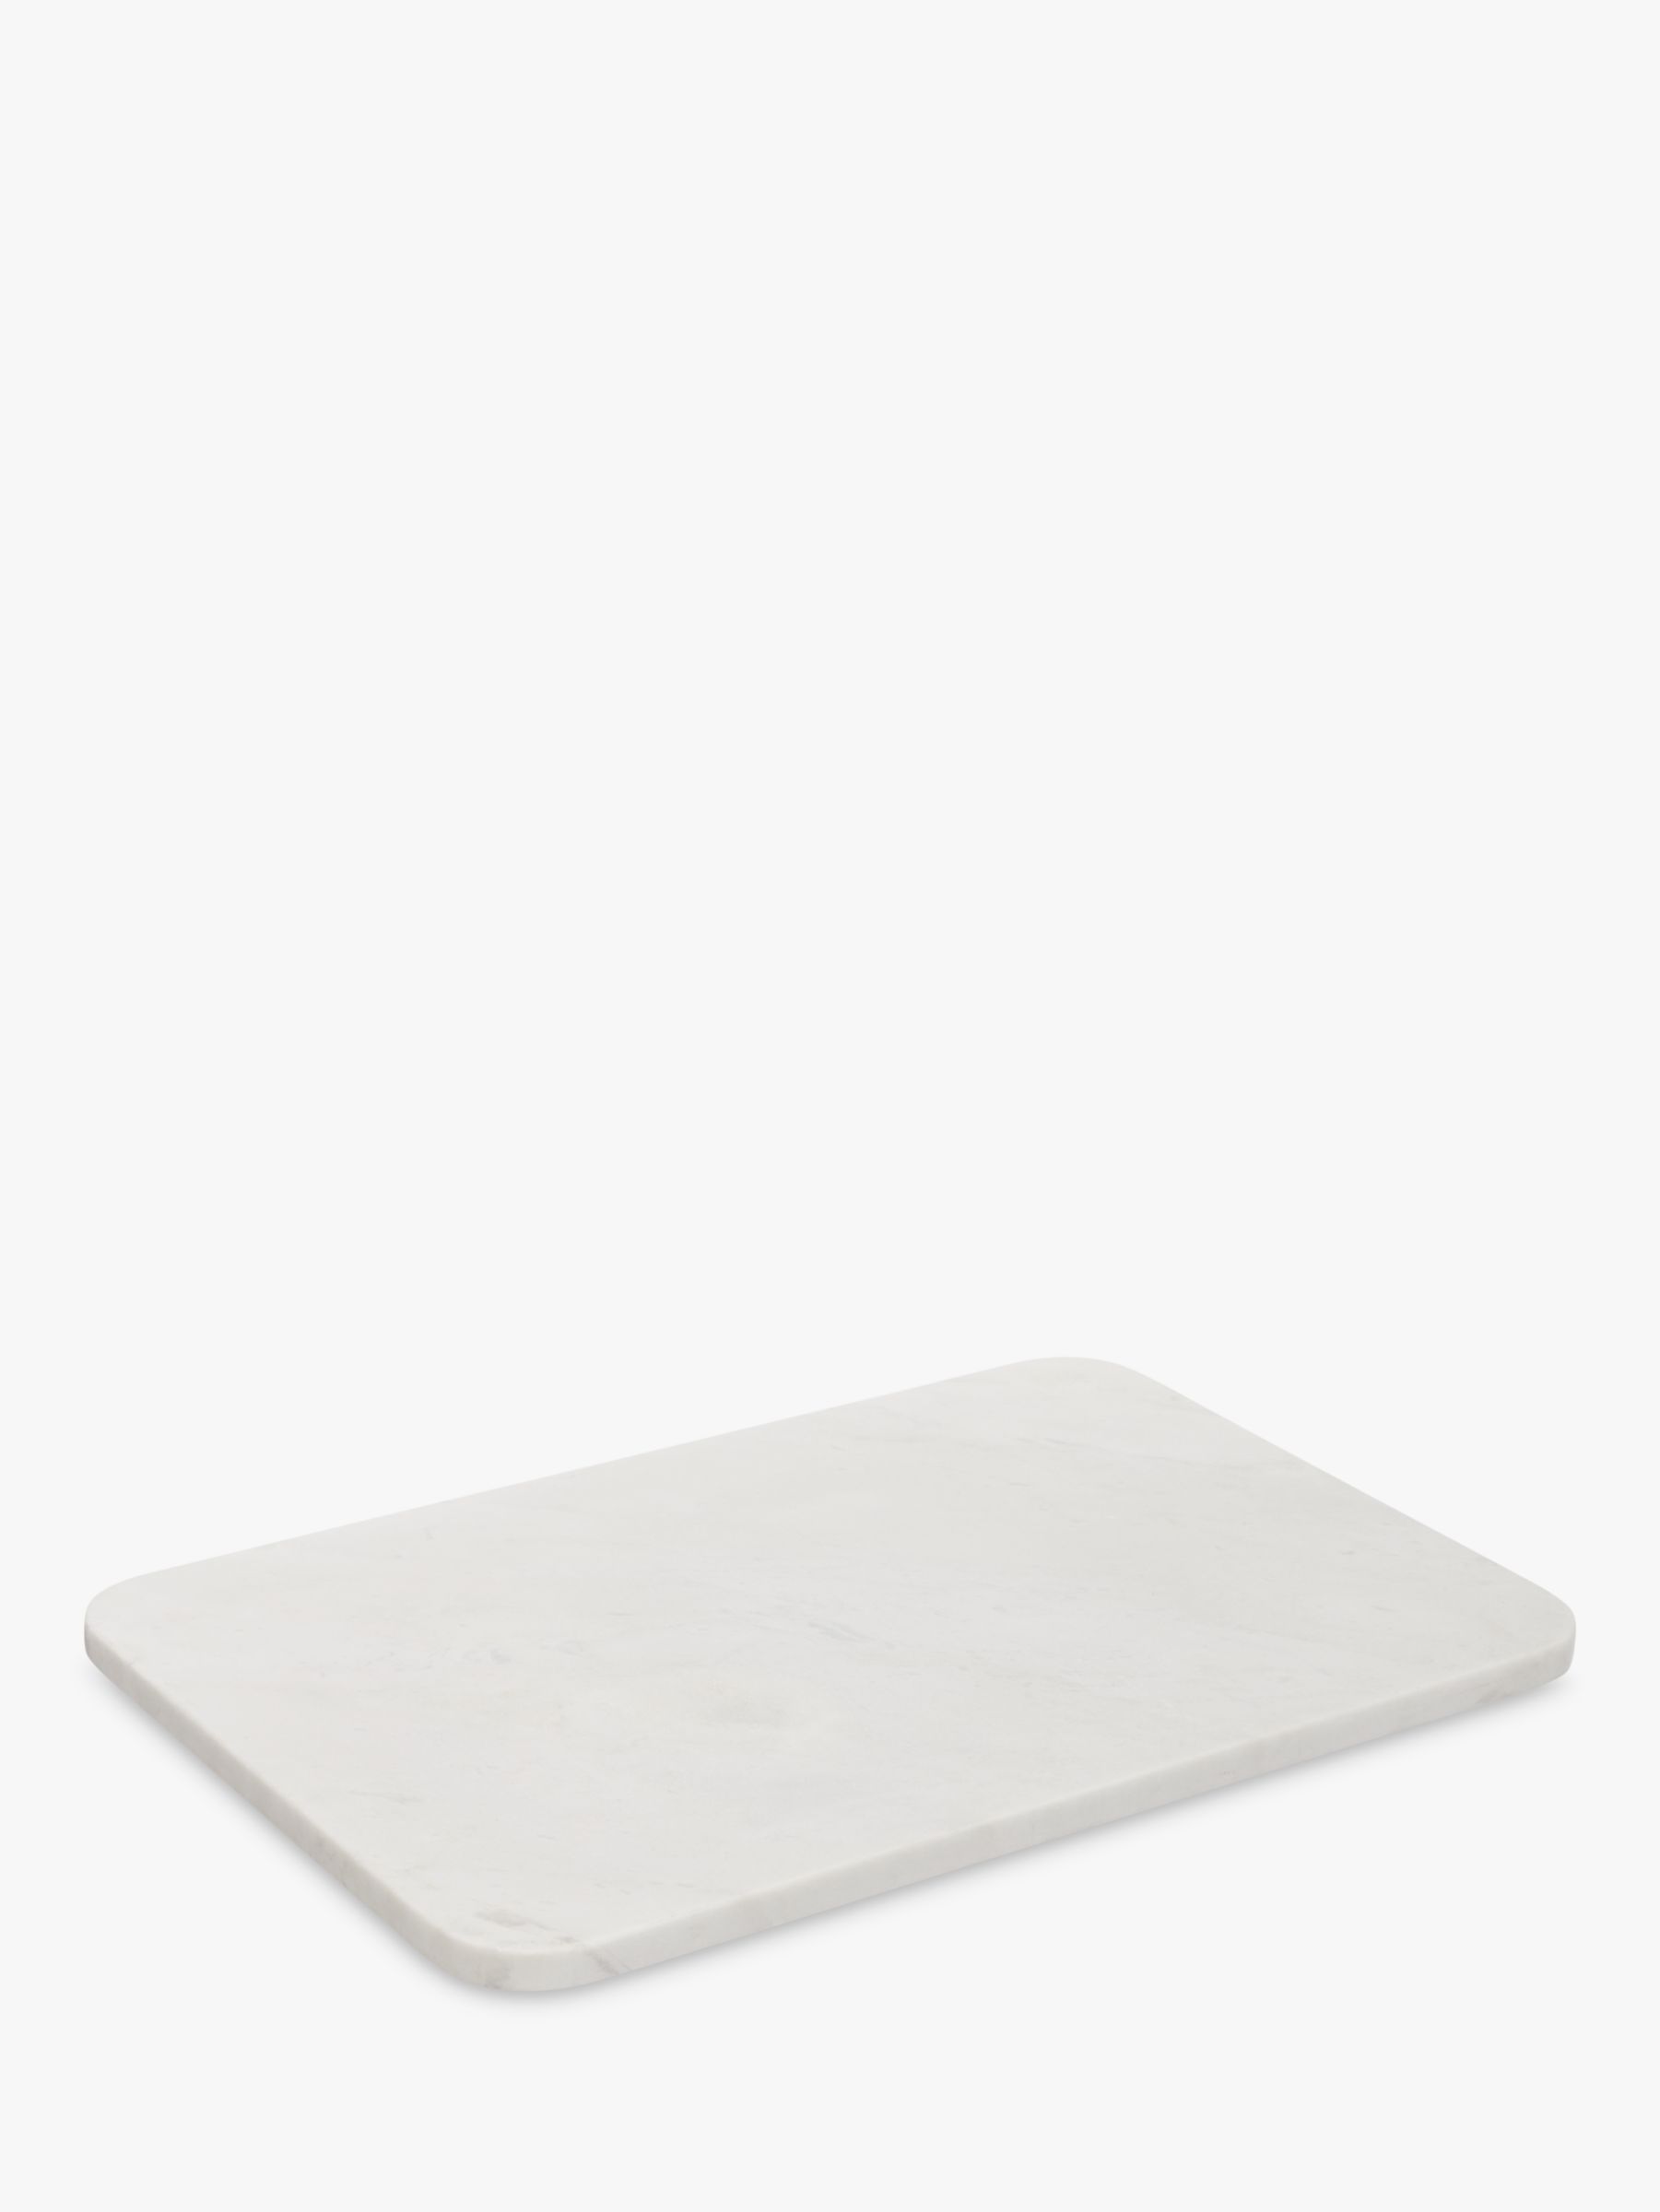 Croft Collection Marble Board, White